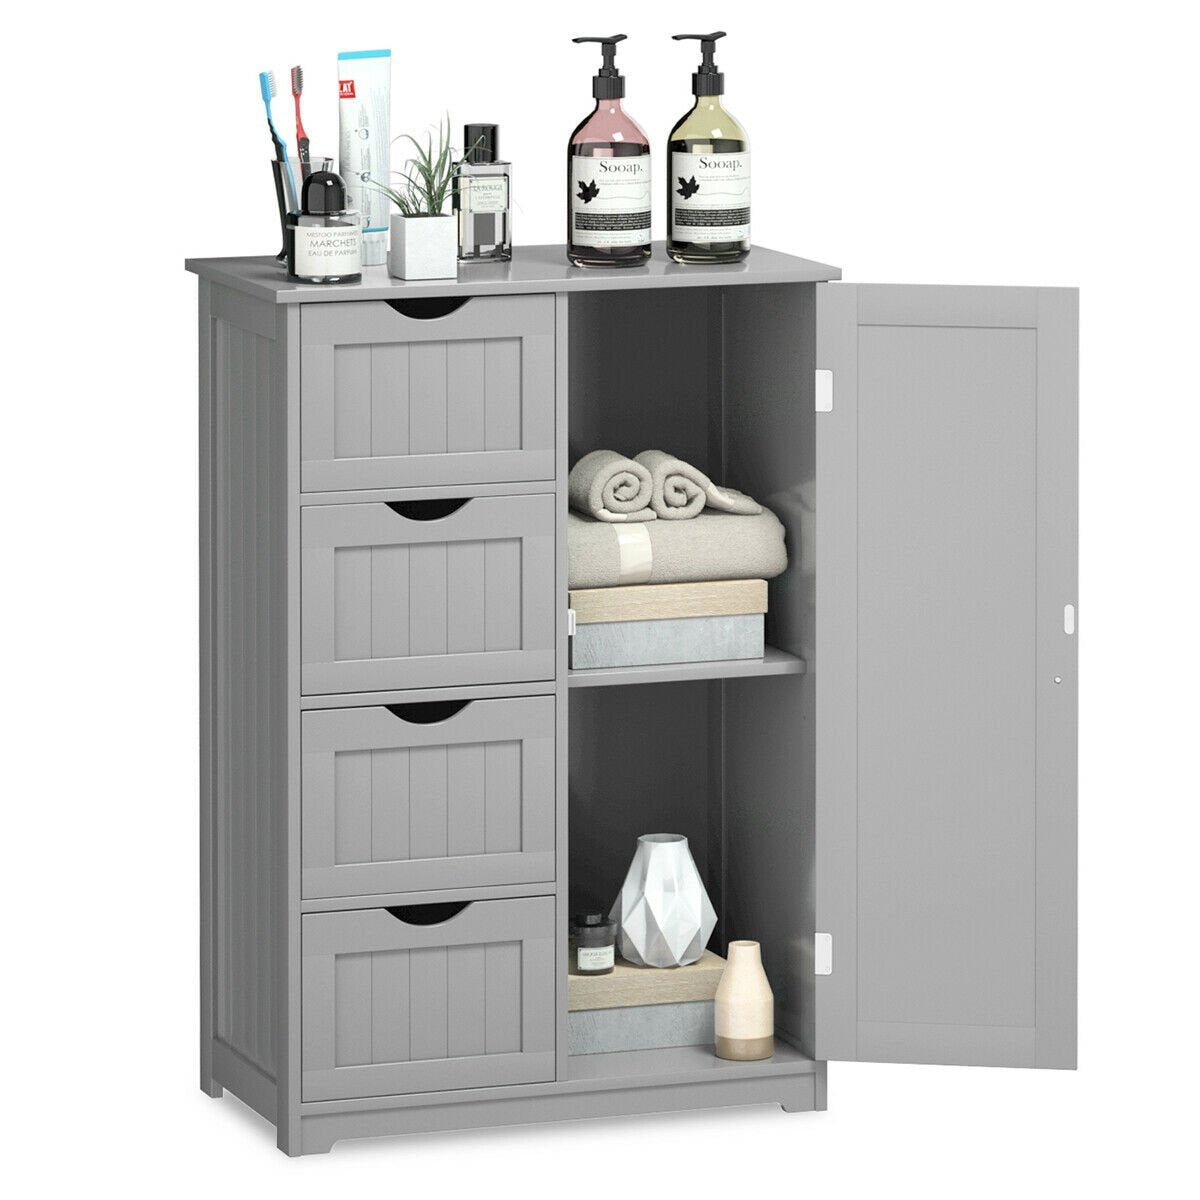 Standing Indoor Wooden Cabinet with 4 Drawers, Gray